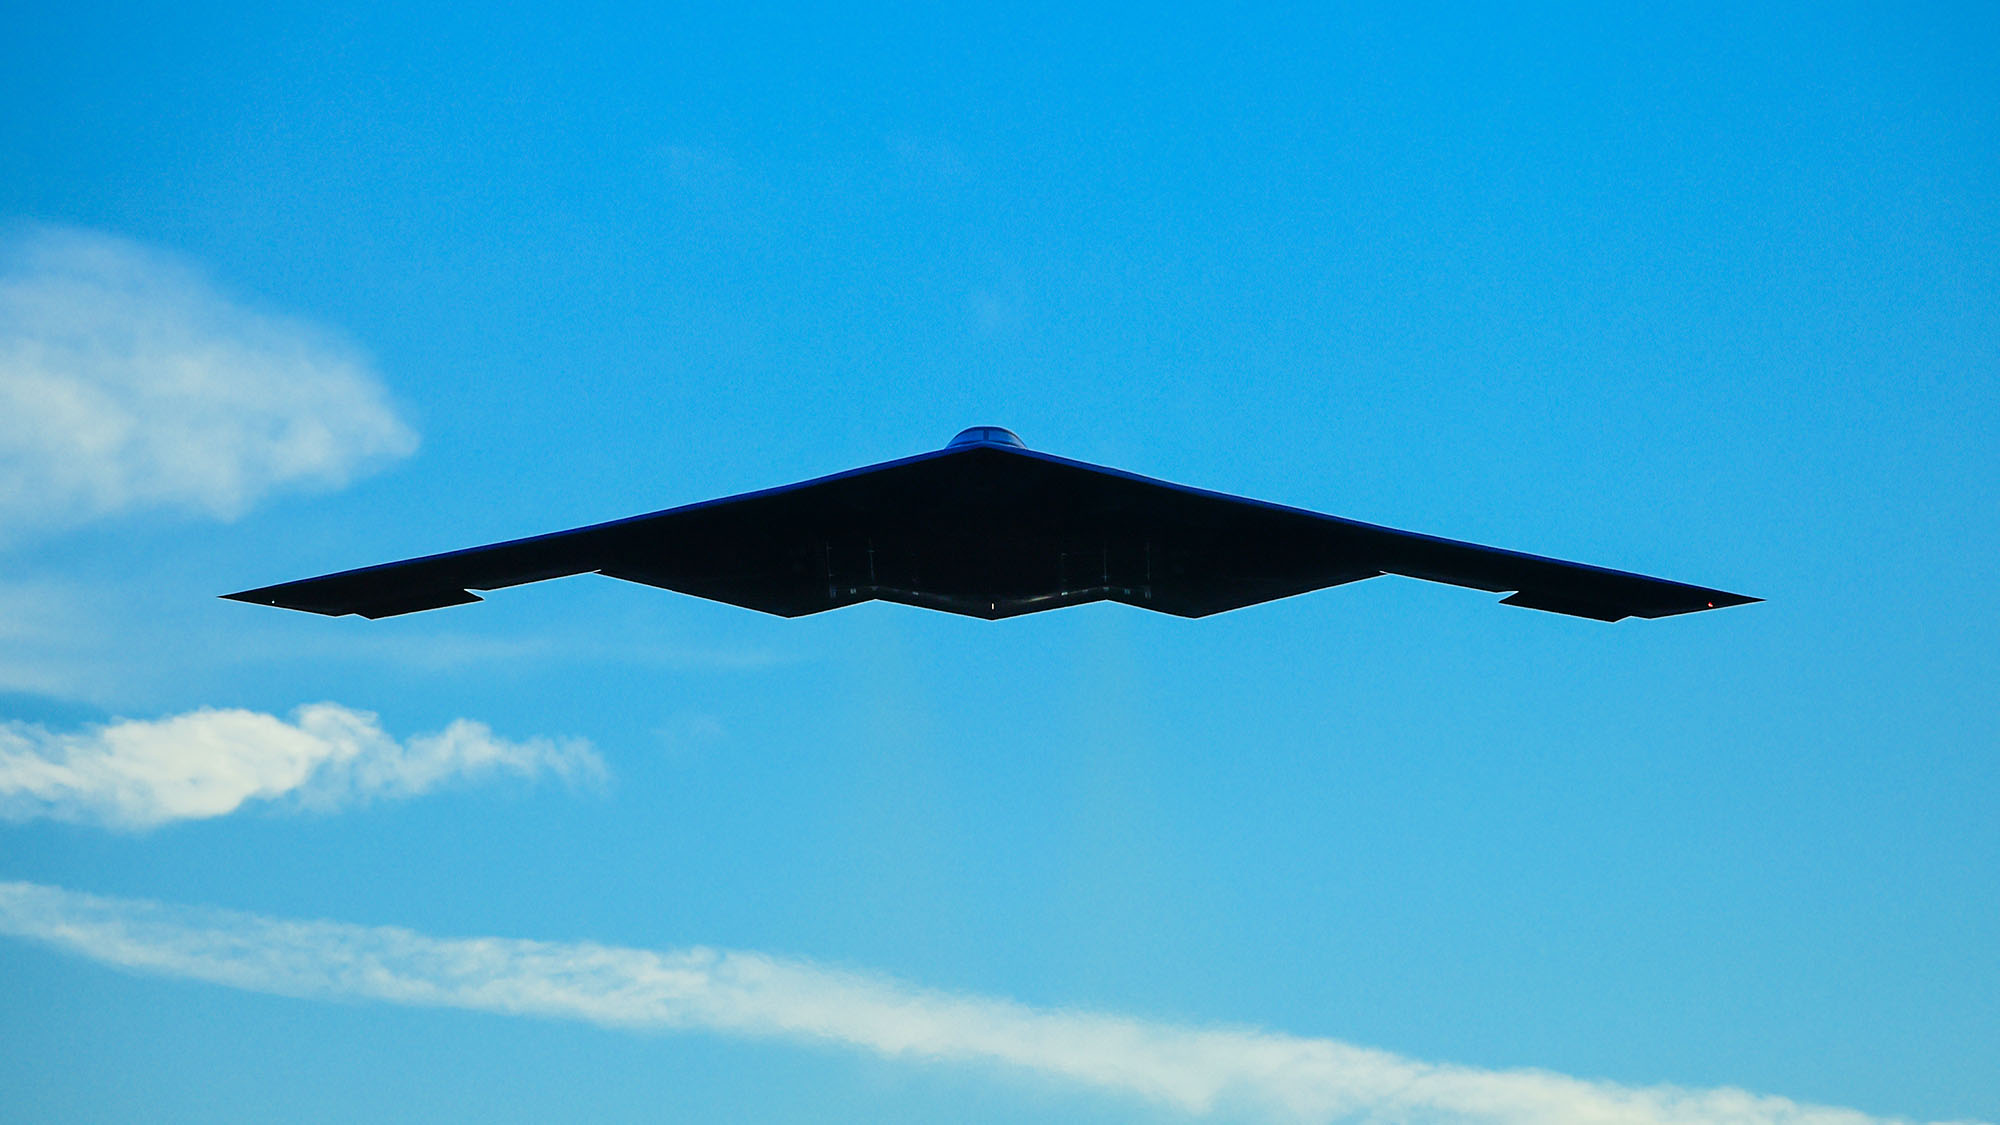 B2 bomber flying amongst clouds on blue skies